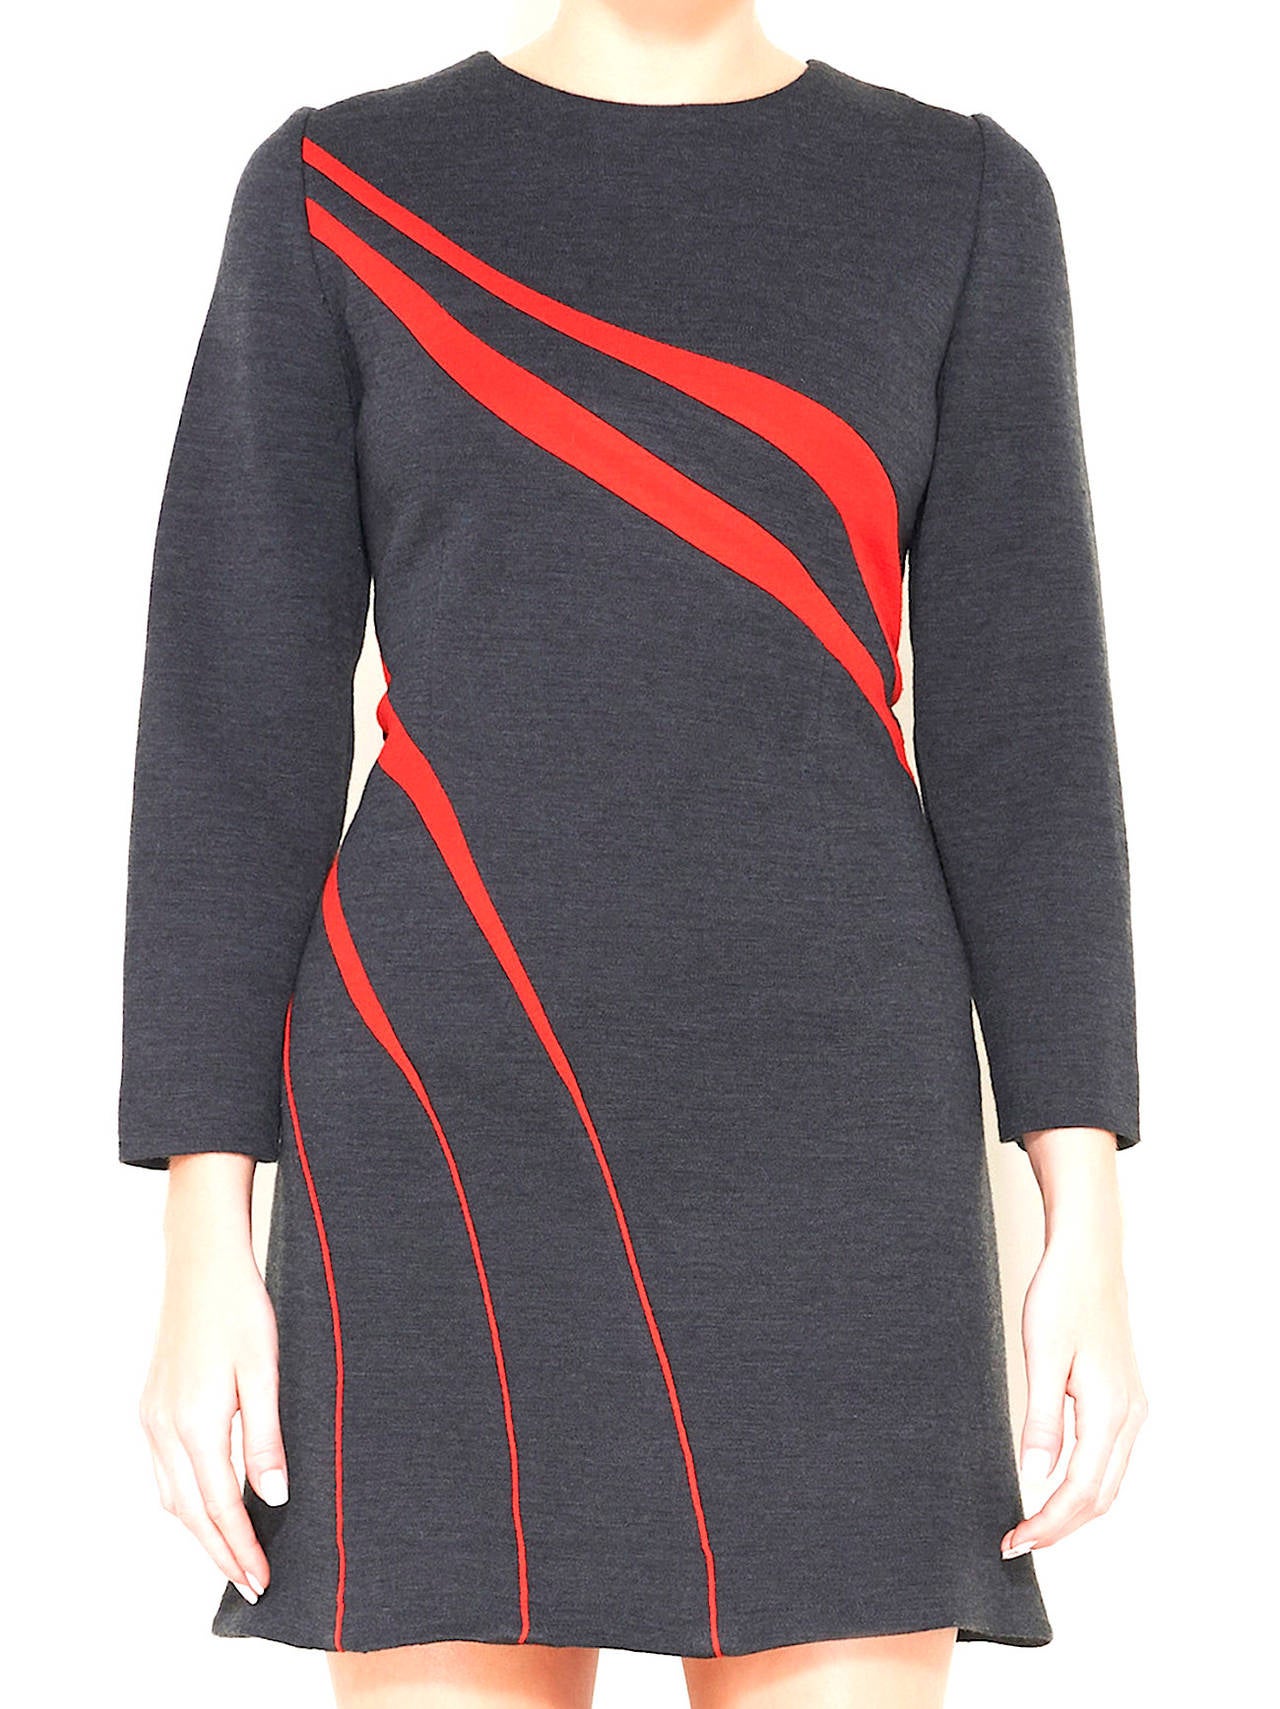 Pierre Cardin Iconic Mod Dress, 1970s For Sale at 1stDibs